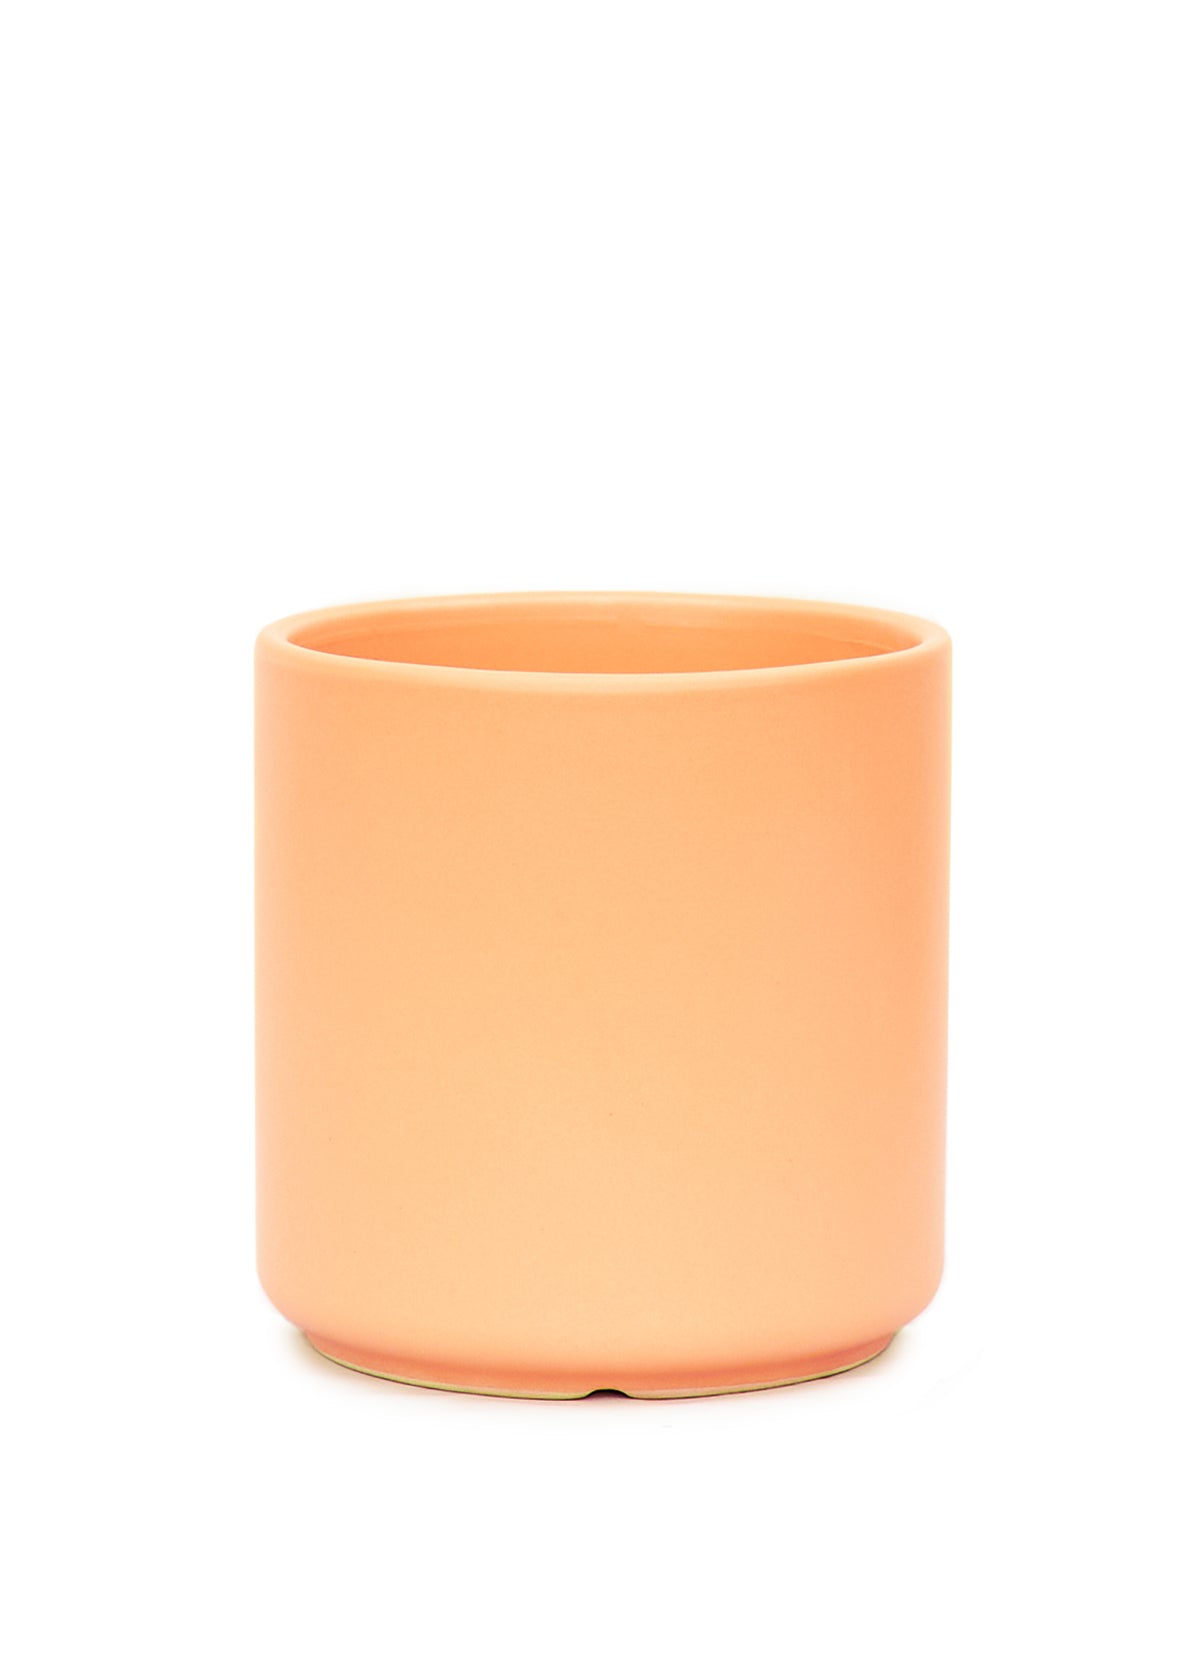 Cylindrical Ceramic Planter, Peach 5&quot; Wide - Plantboy - 